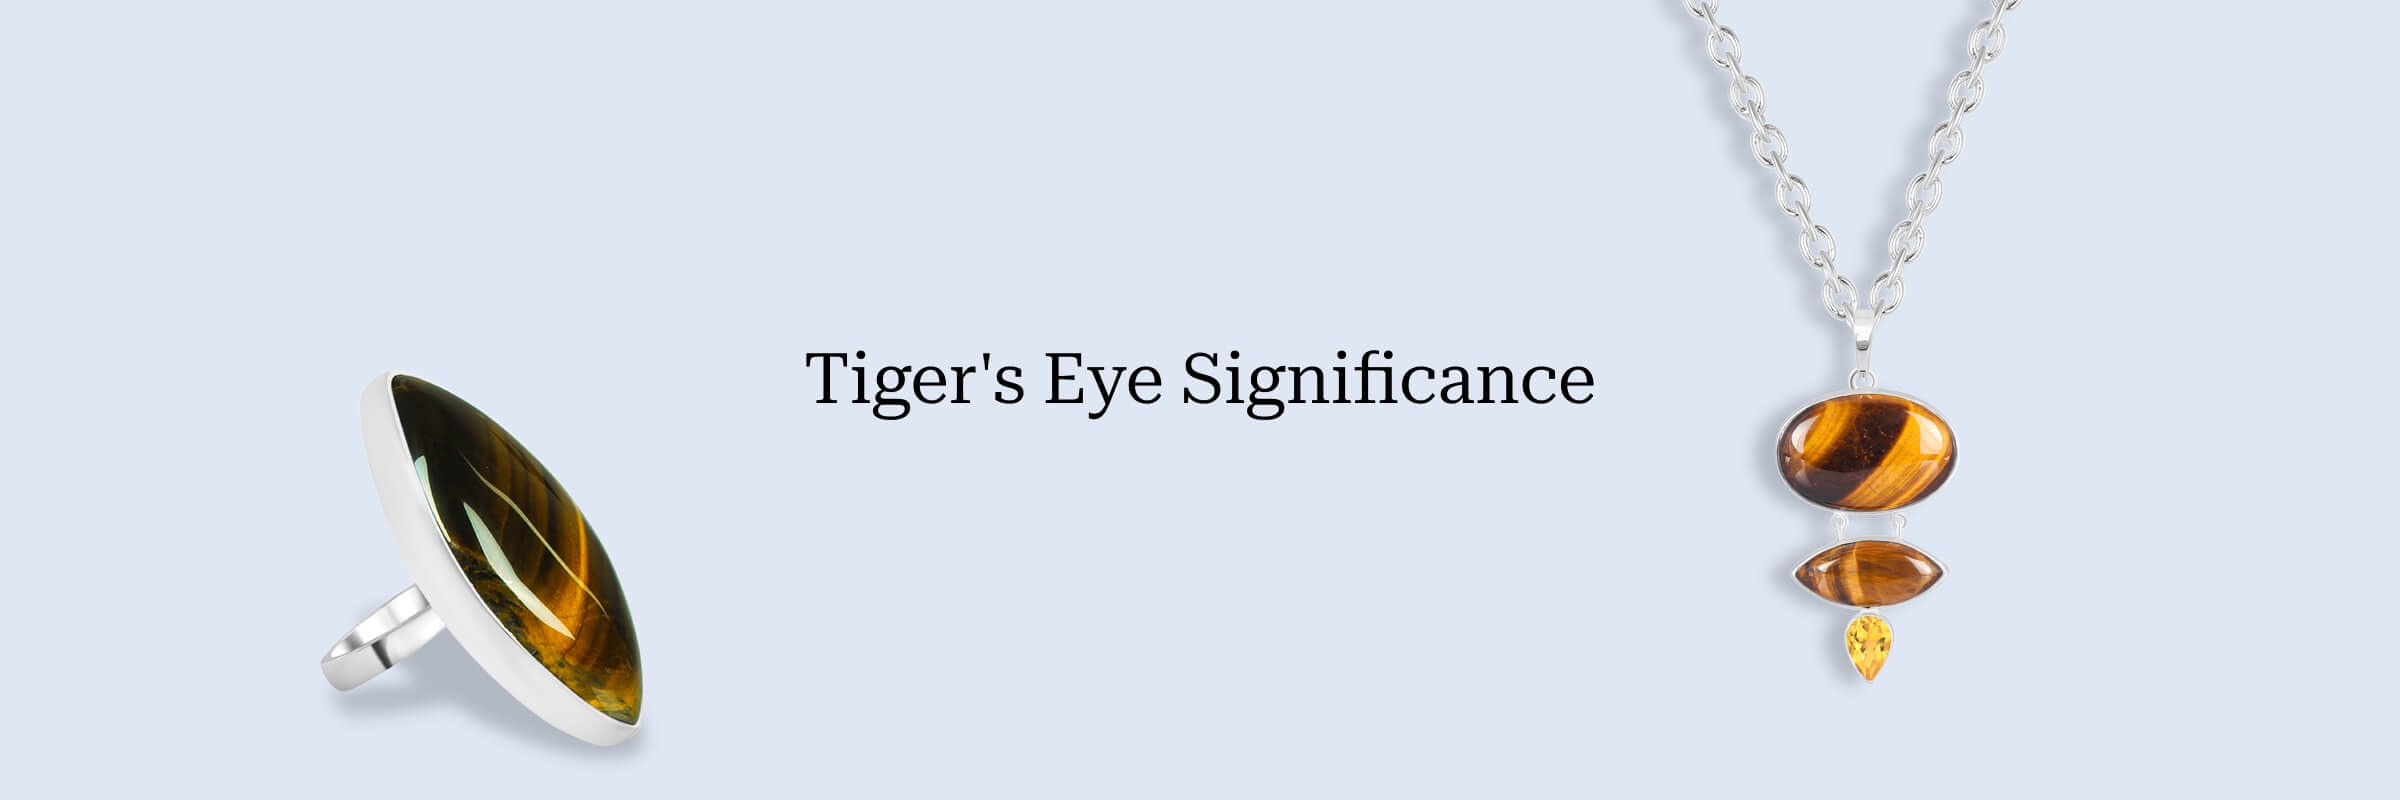 Significance Of Tiger's Eye